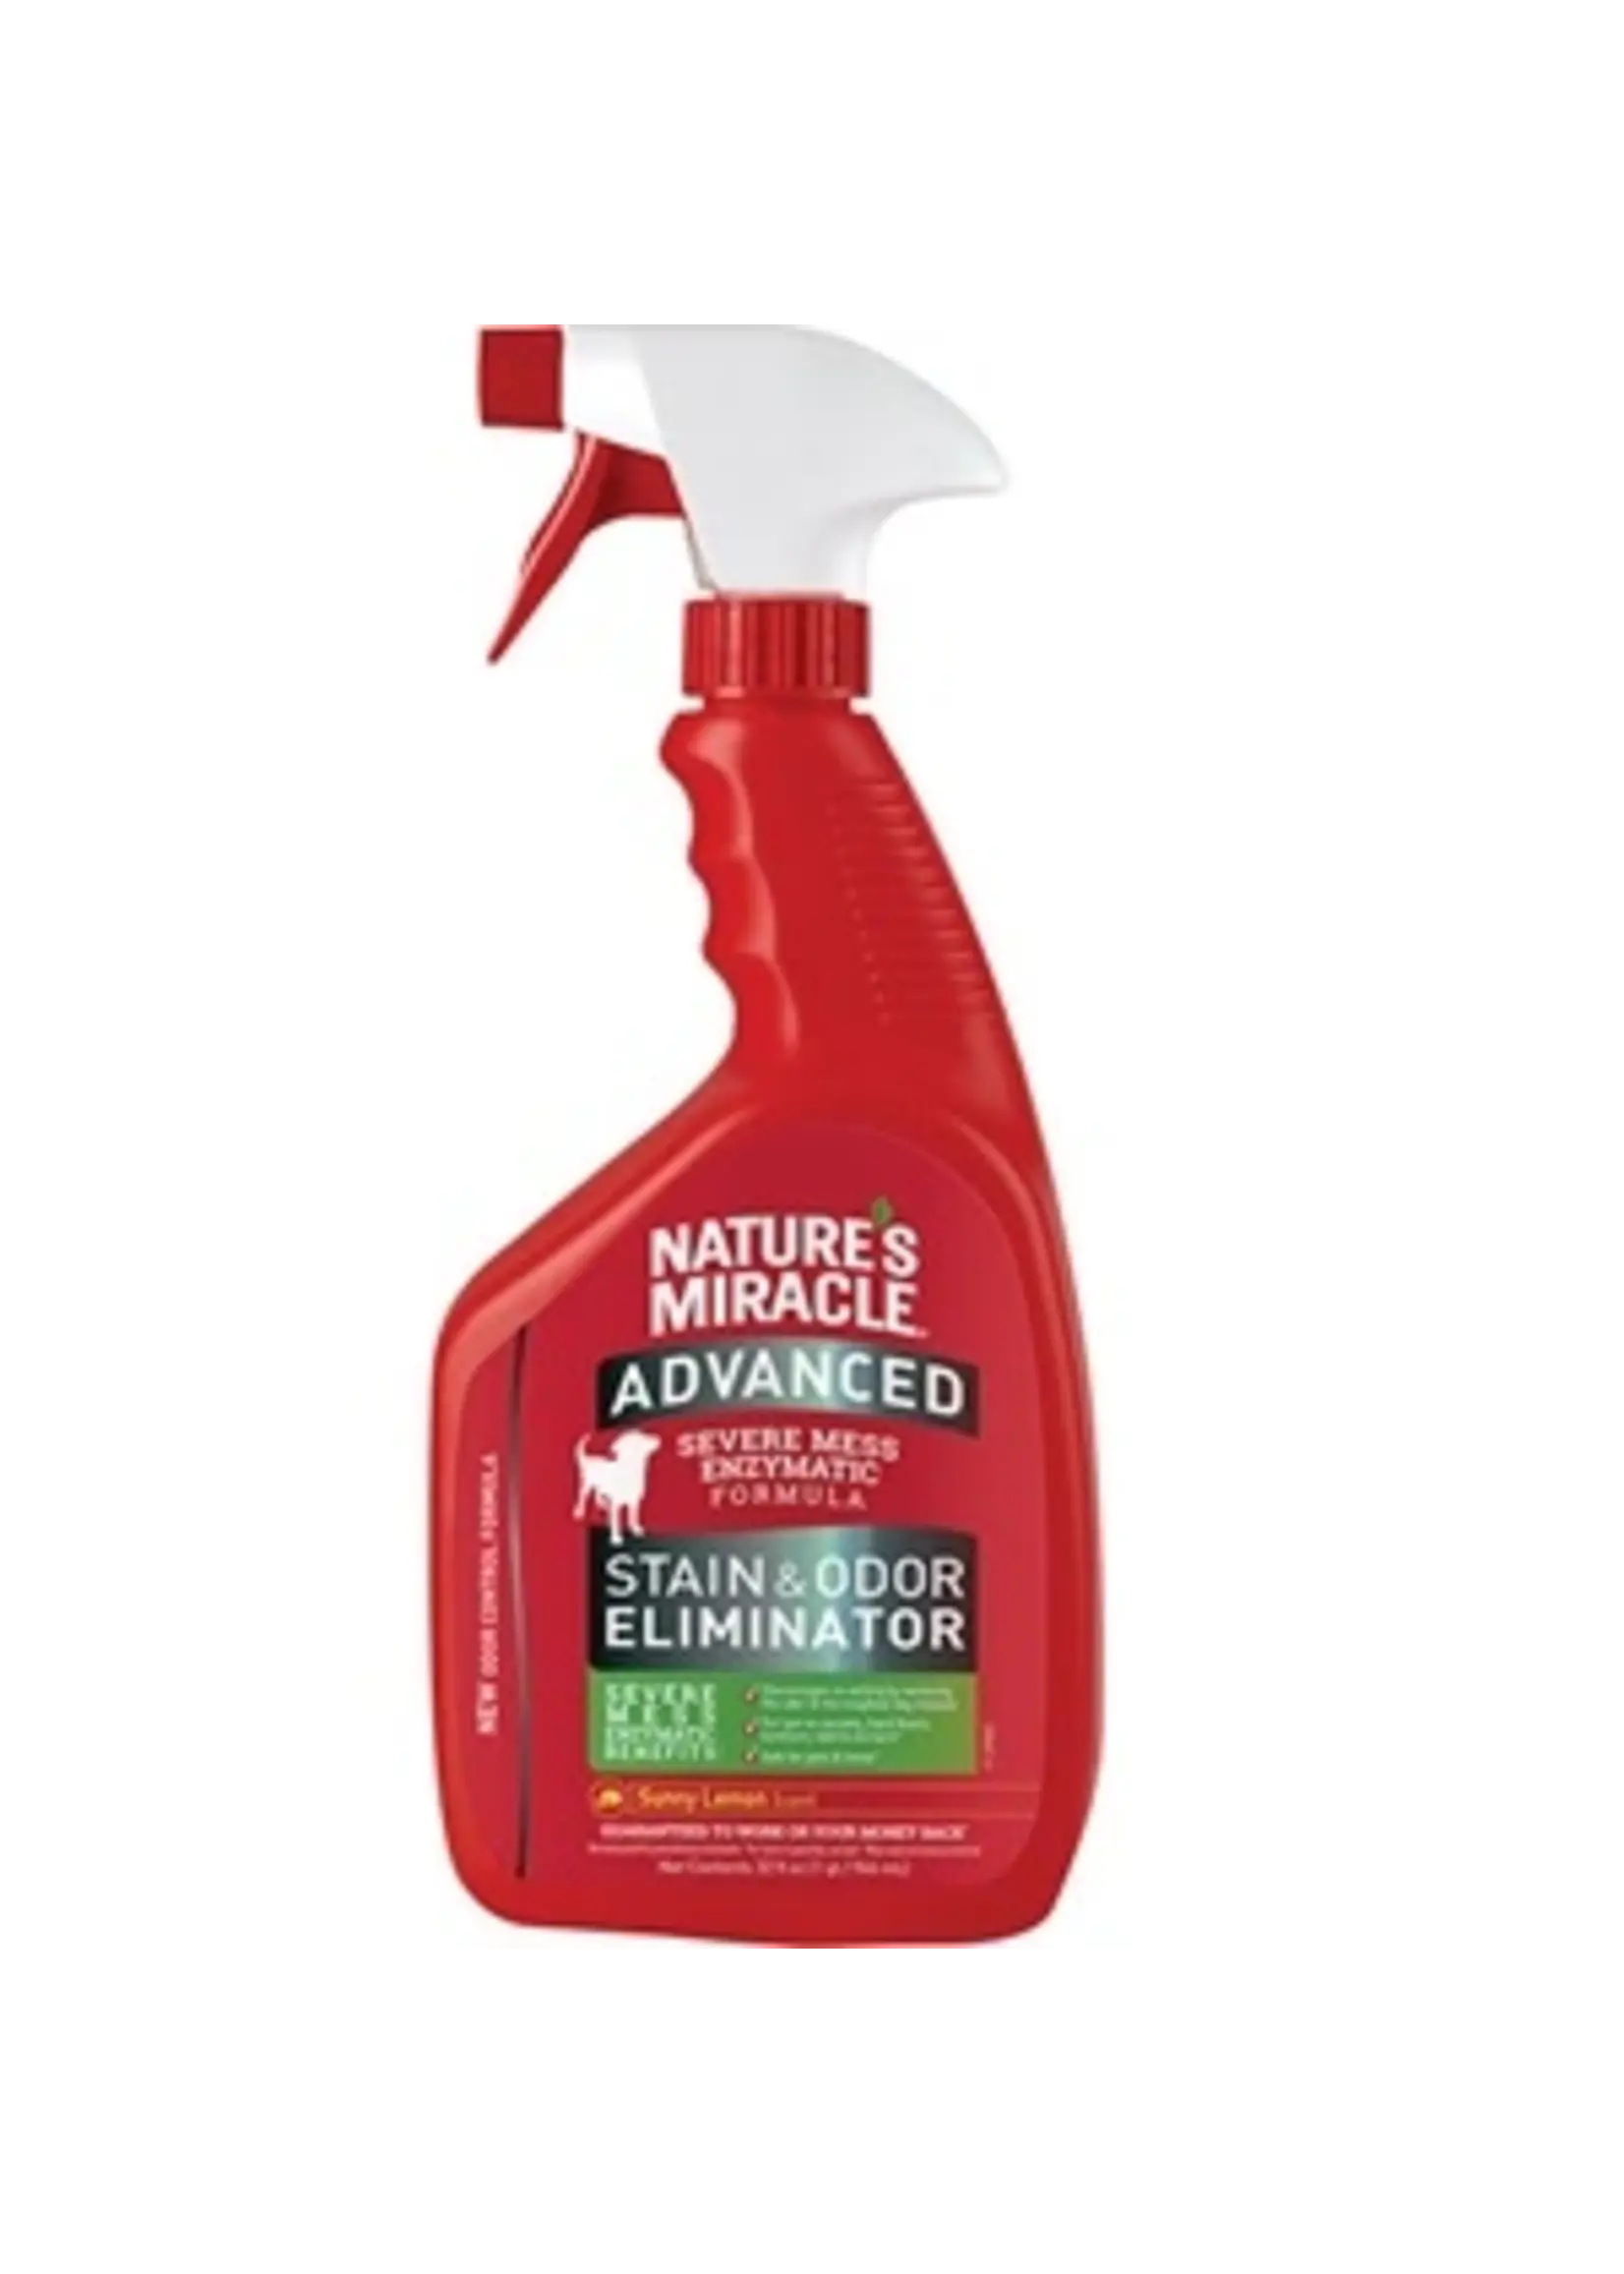 Nature's Miracle Advanced - Severe Mess Enzymatic Stain & Odor Remover Dog